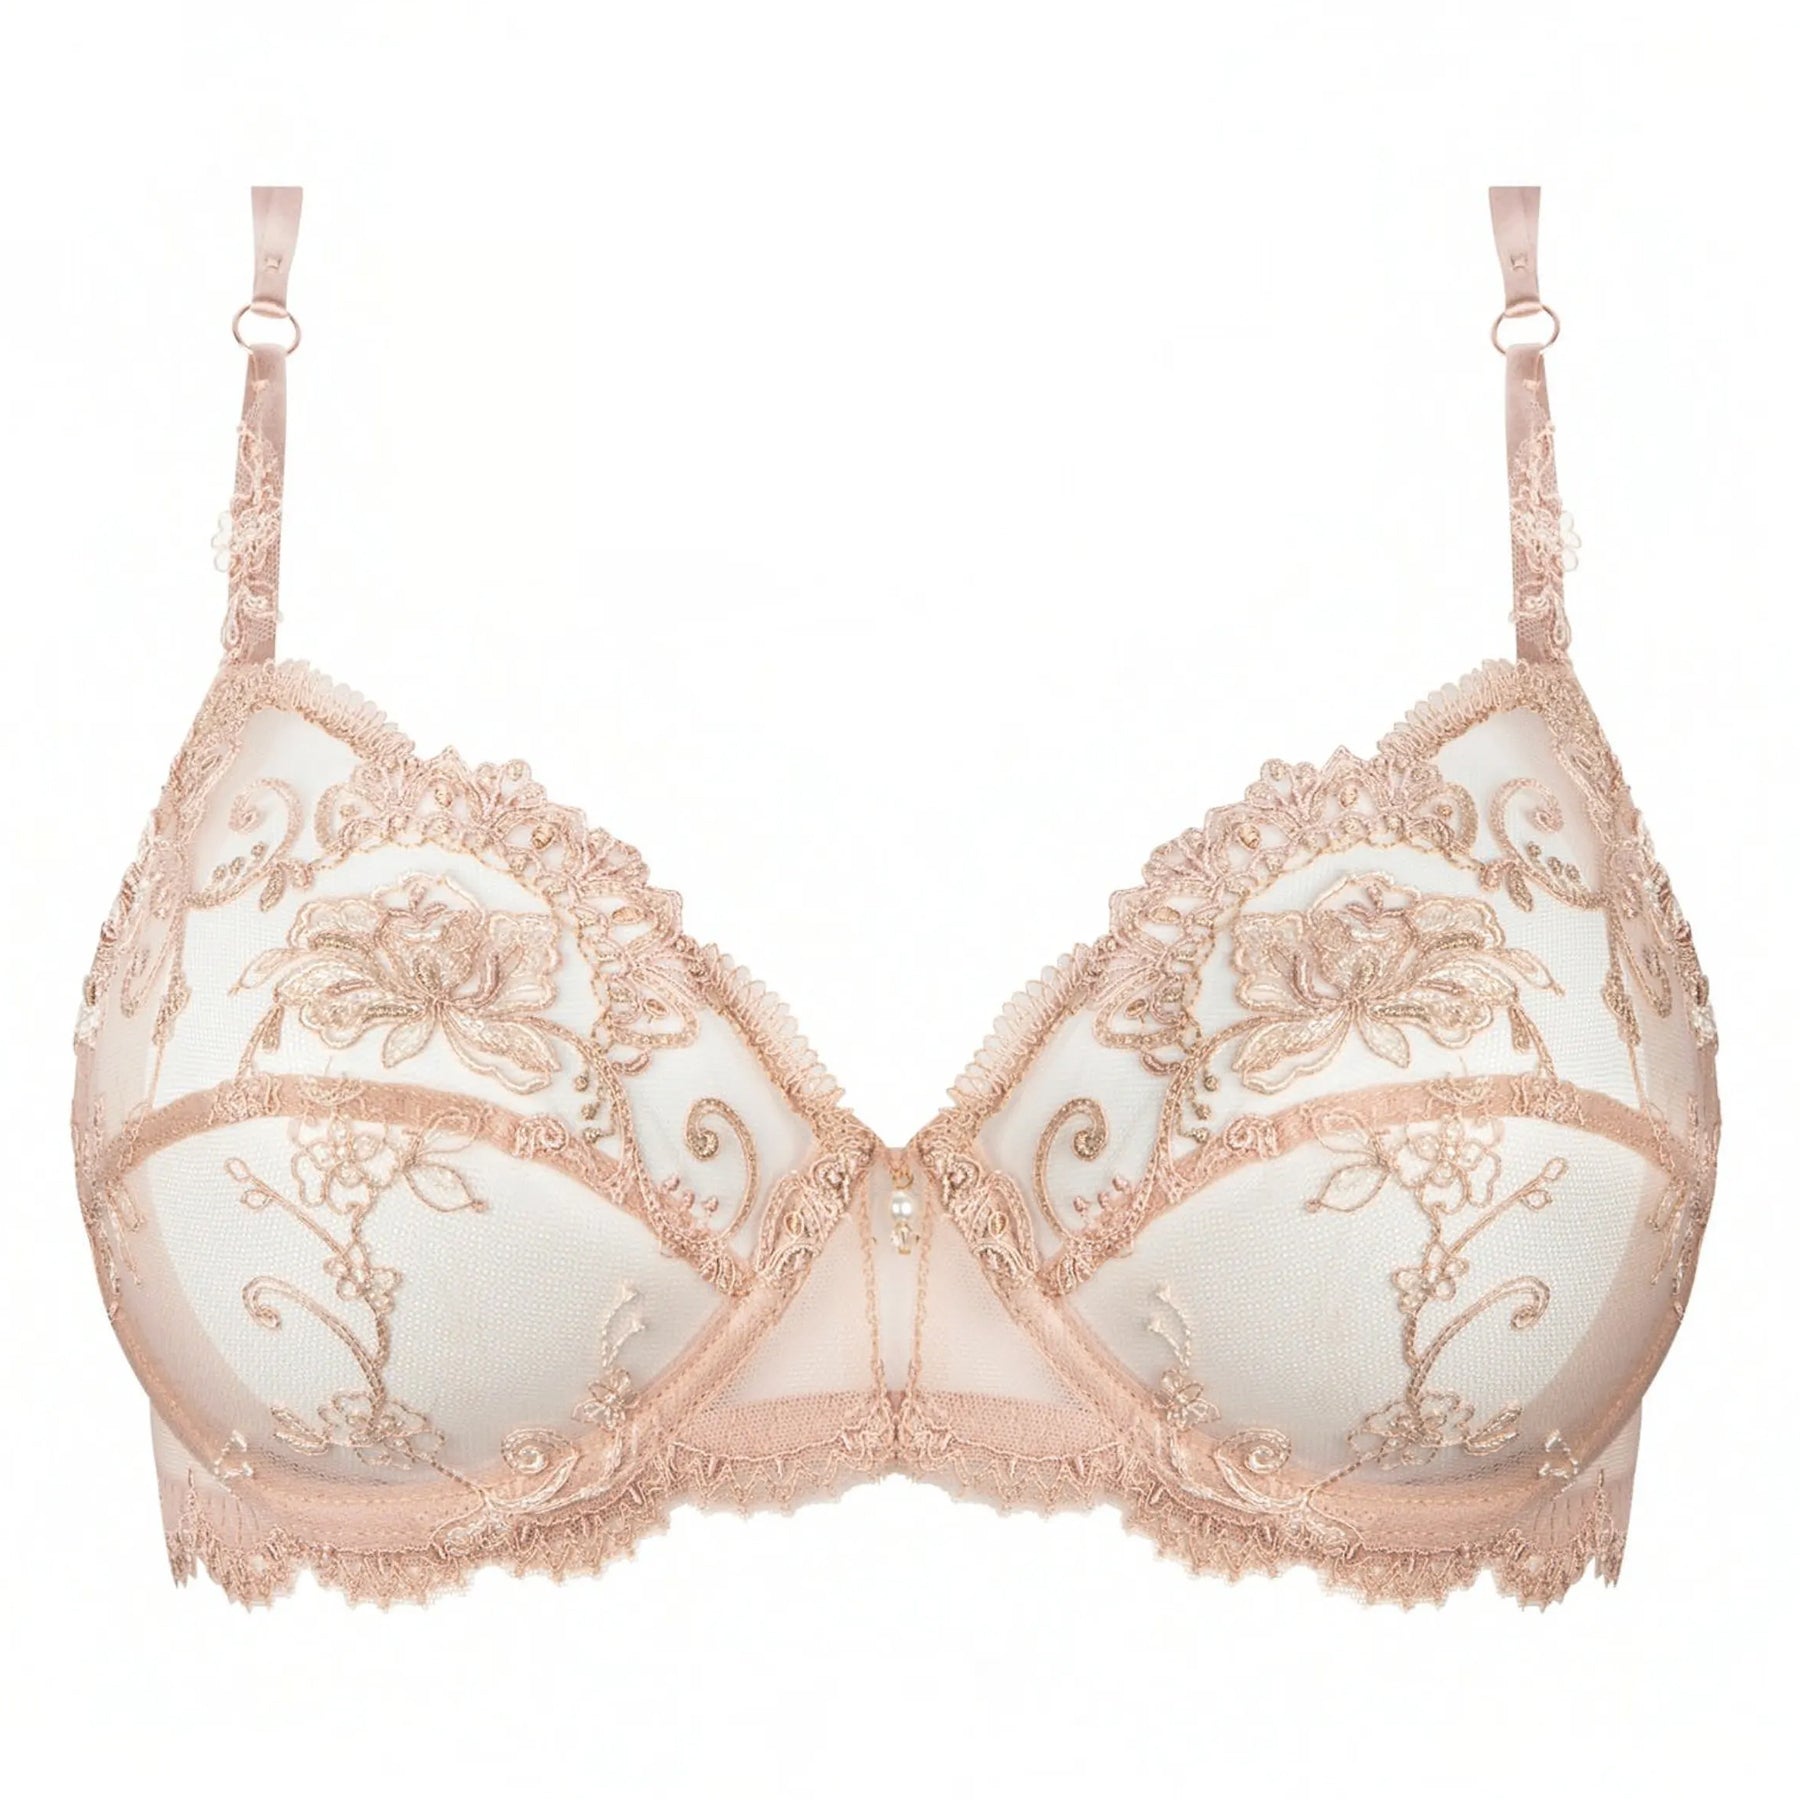 Lise Charmel Dressing Floral Demi Cup Full Support Bra in Dressing